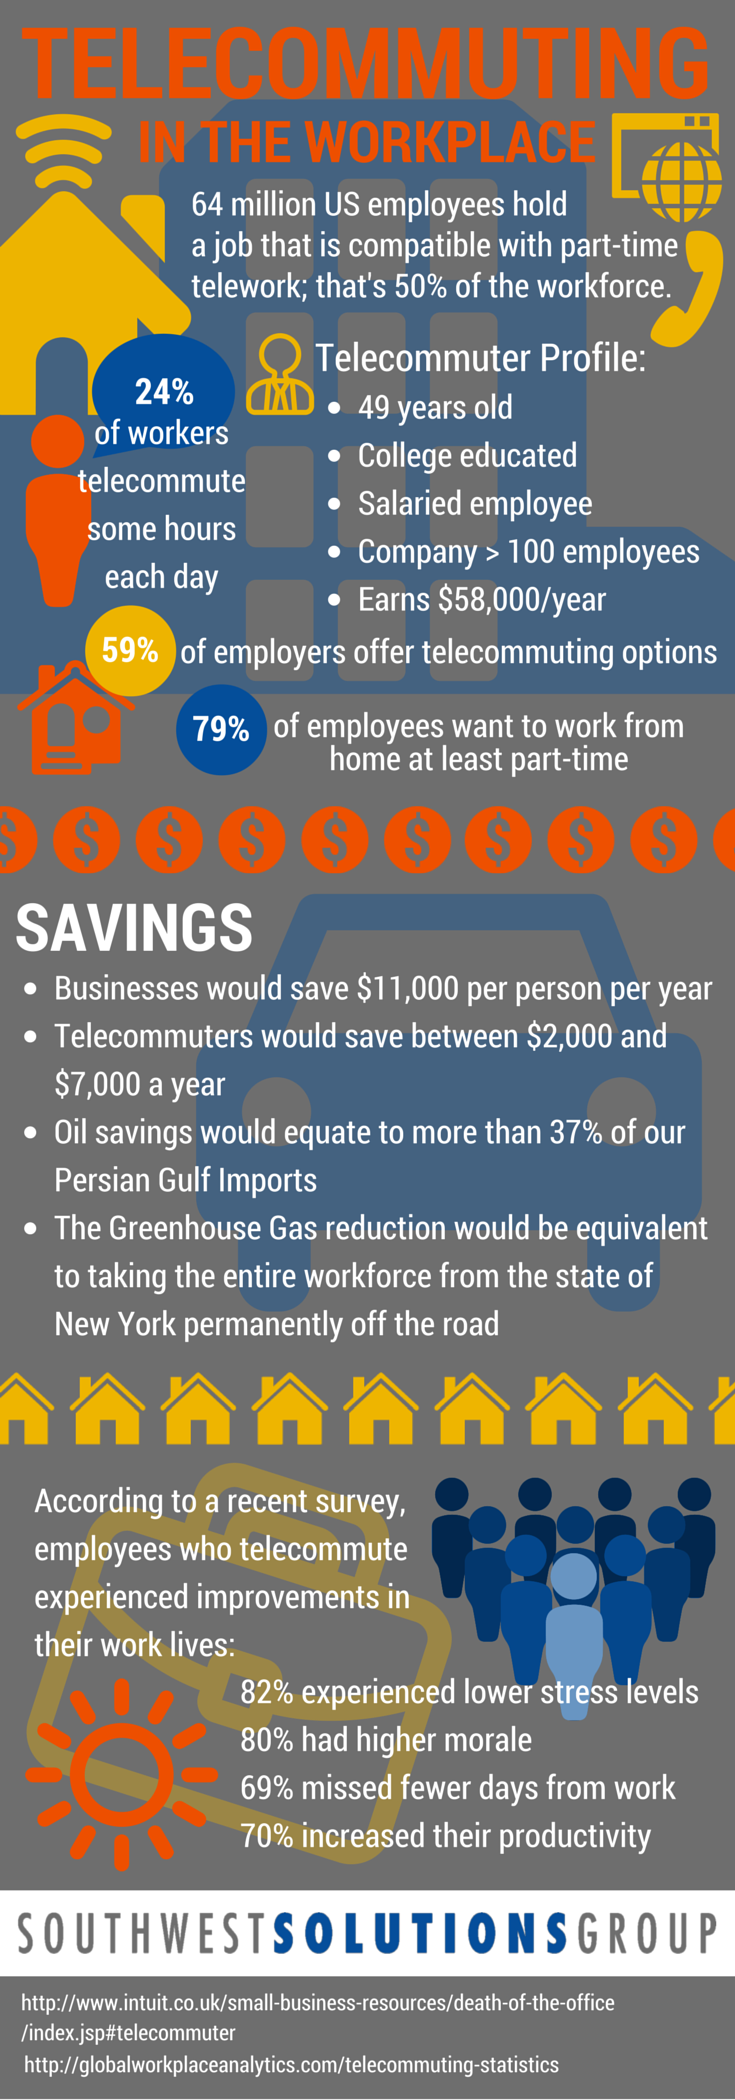 infographic telecommuting in the workplace